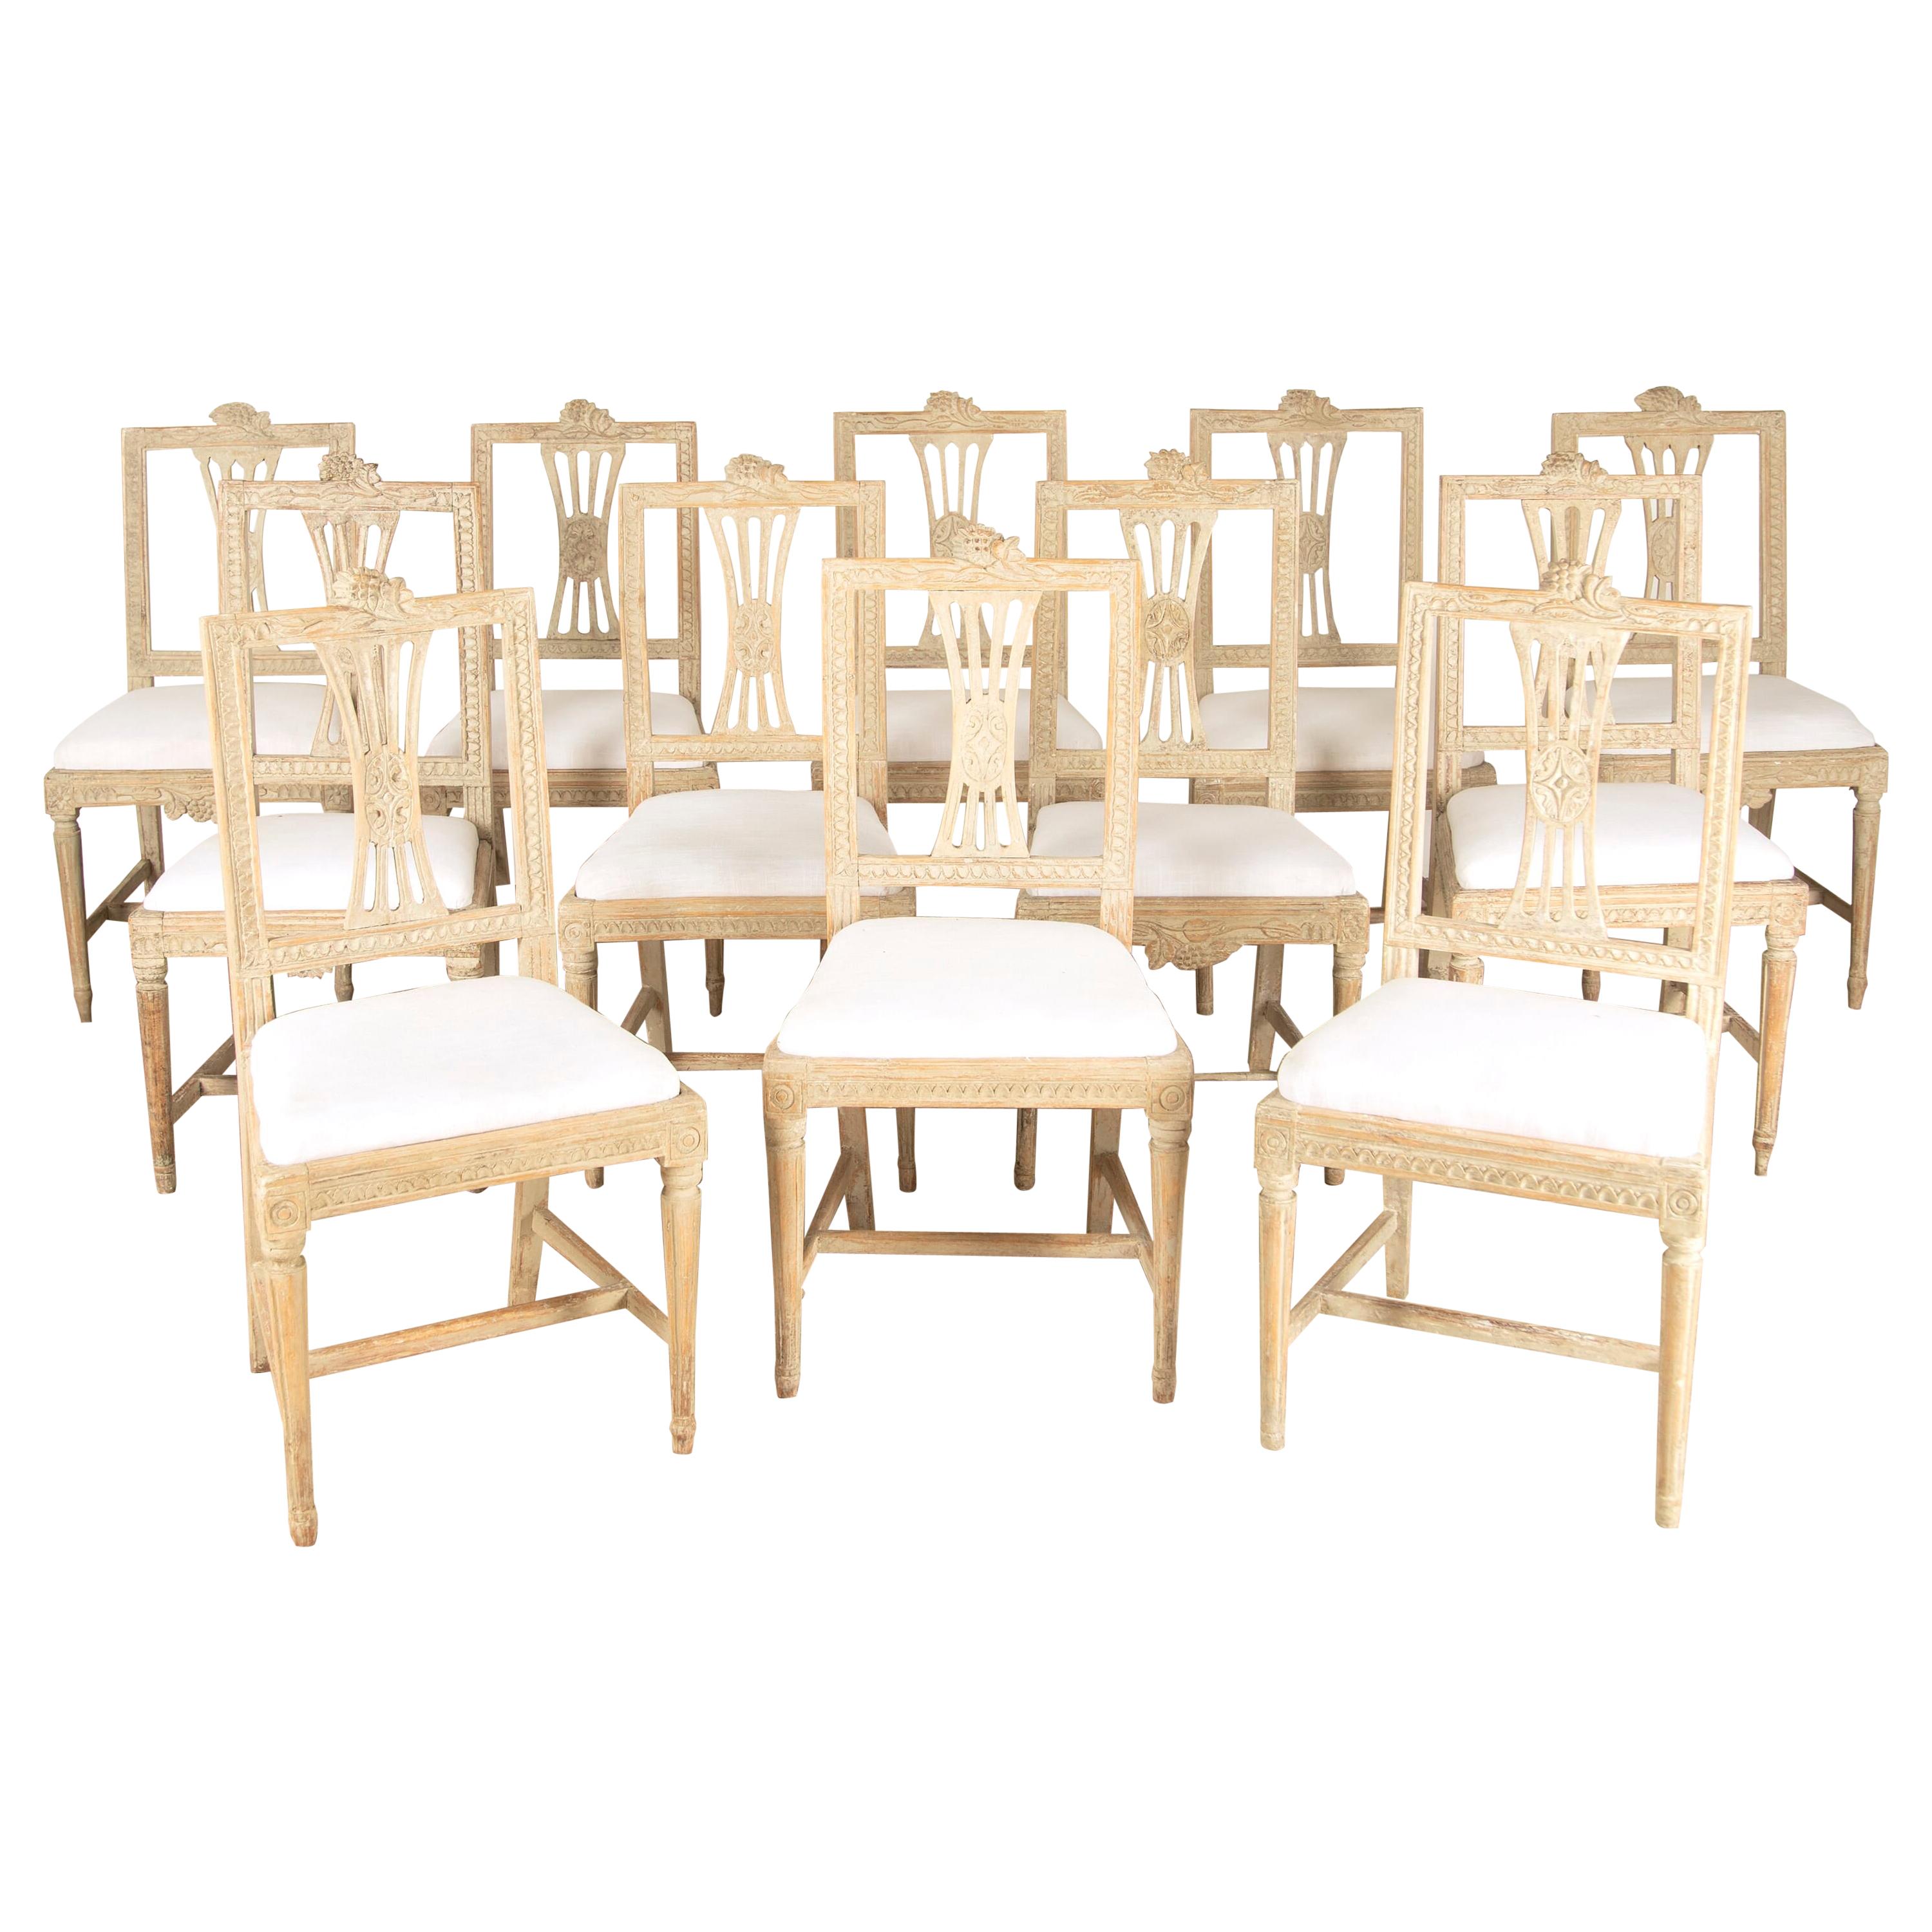 12 Swedish Dining Chairs from Lindome